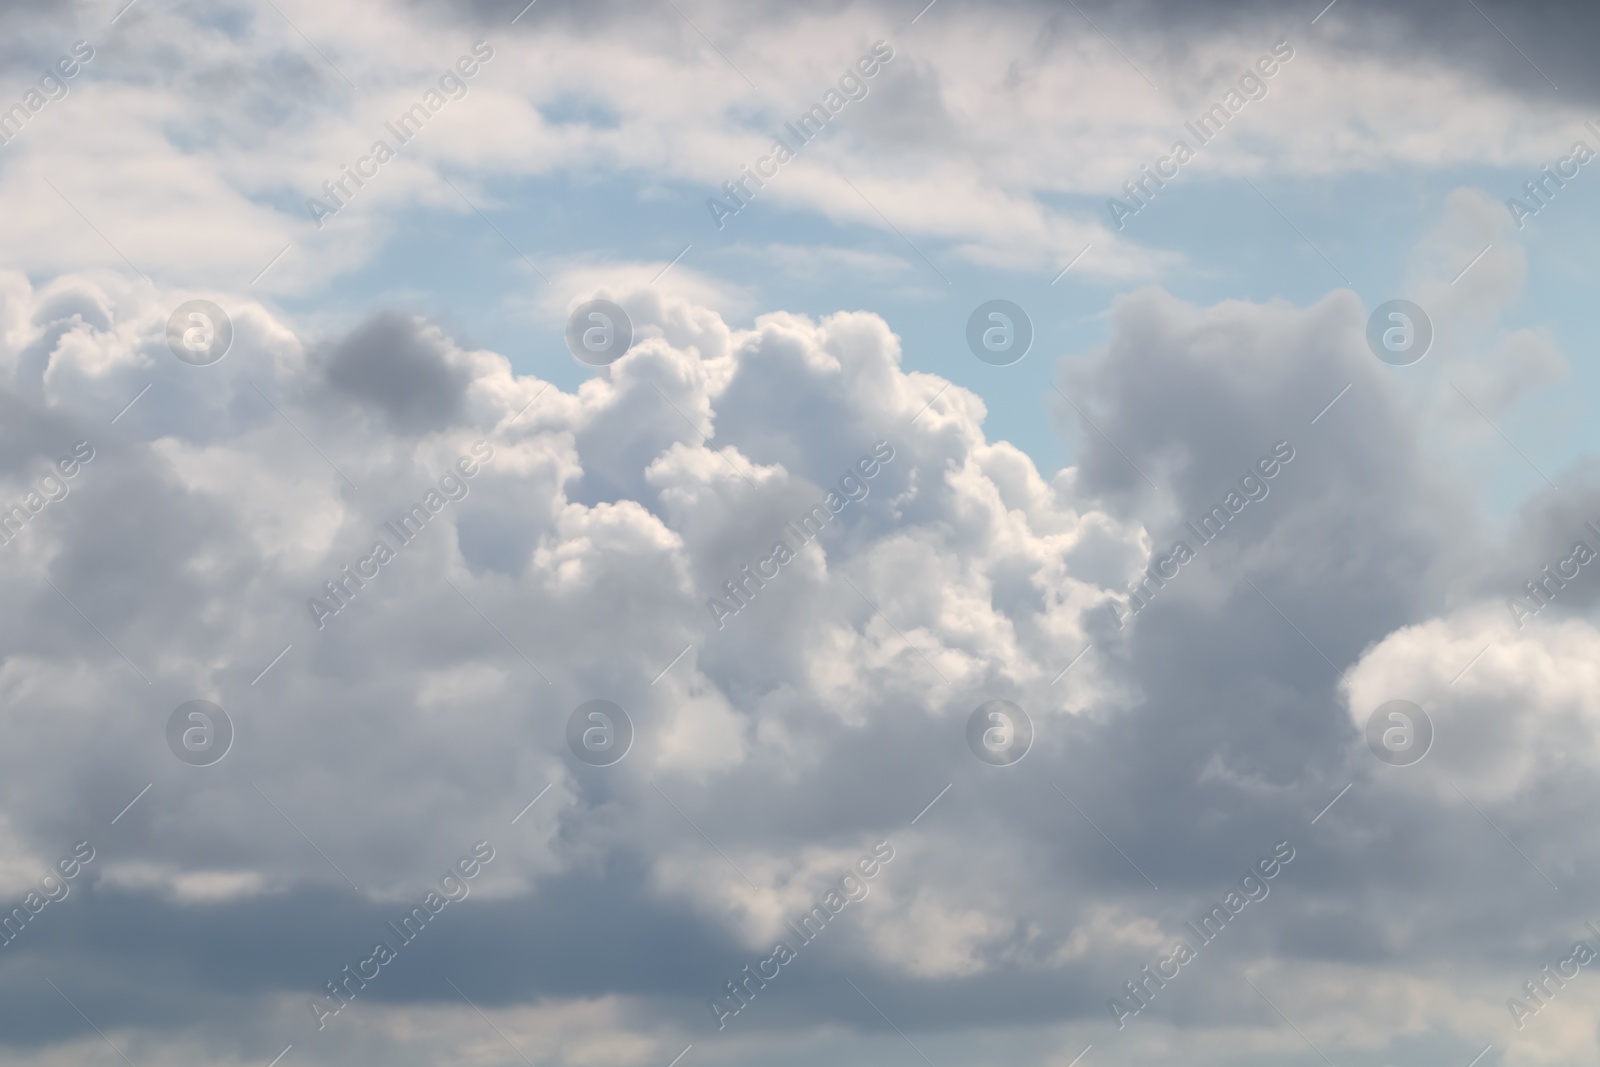 Photo of Picturesque view of beautiful sky with fluffy white clouds